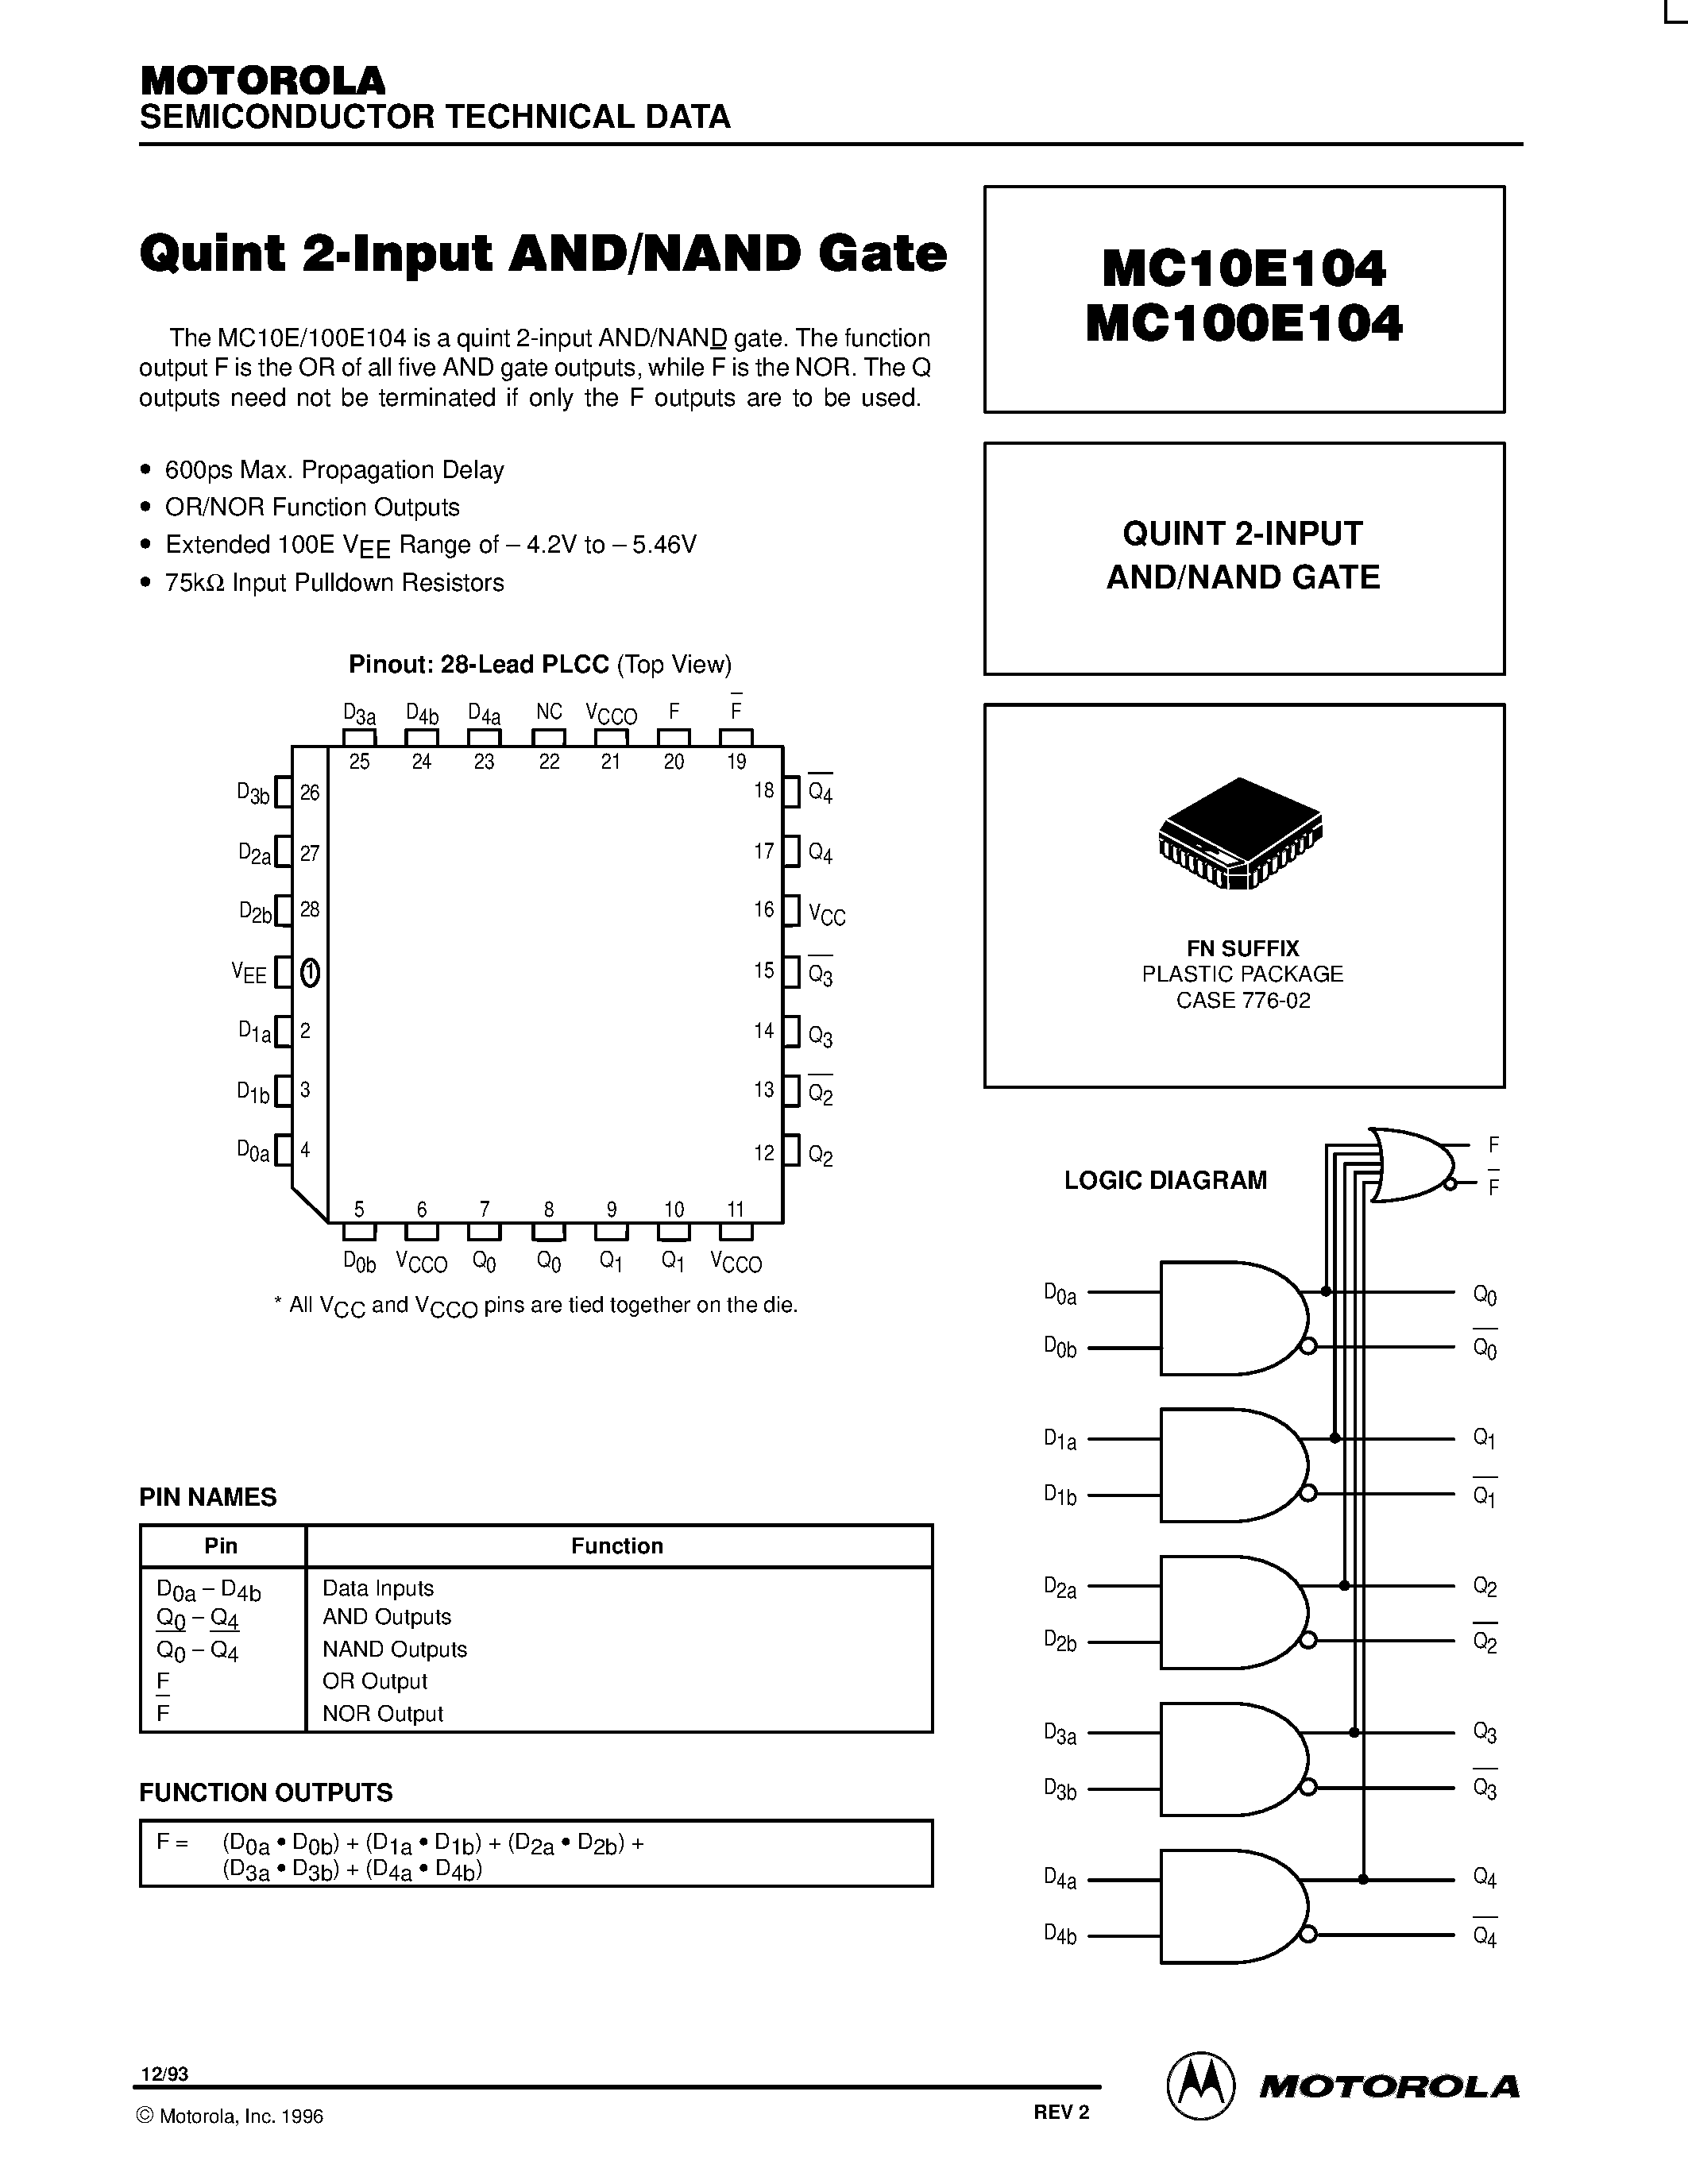 Datasheet MC100E104FN - QUINT 2-INPUT AND/NAND GATE page 1